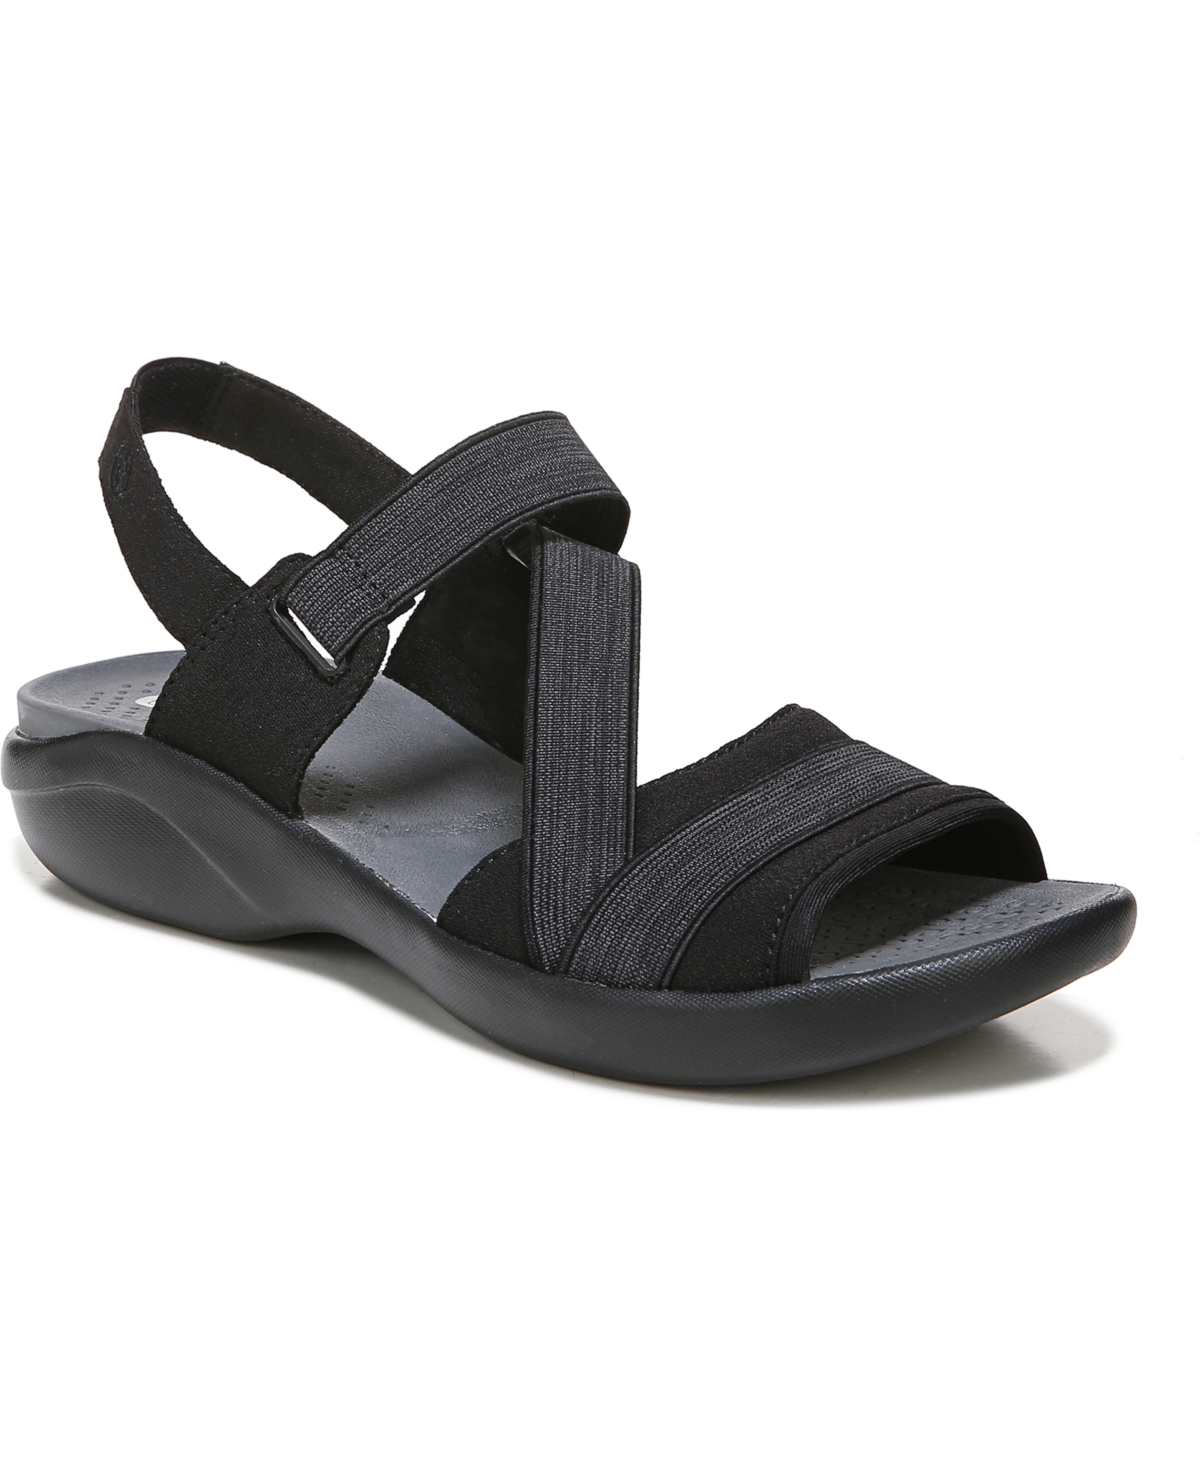 BZees Chance Washable Strappy Sandals Women's Shoes